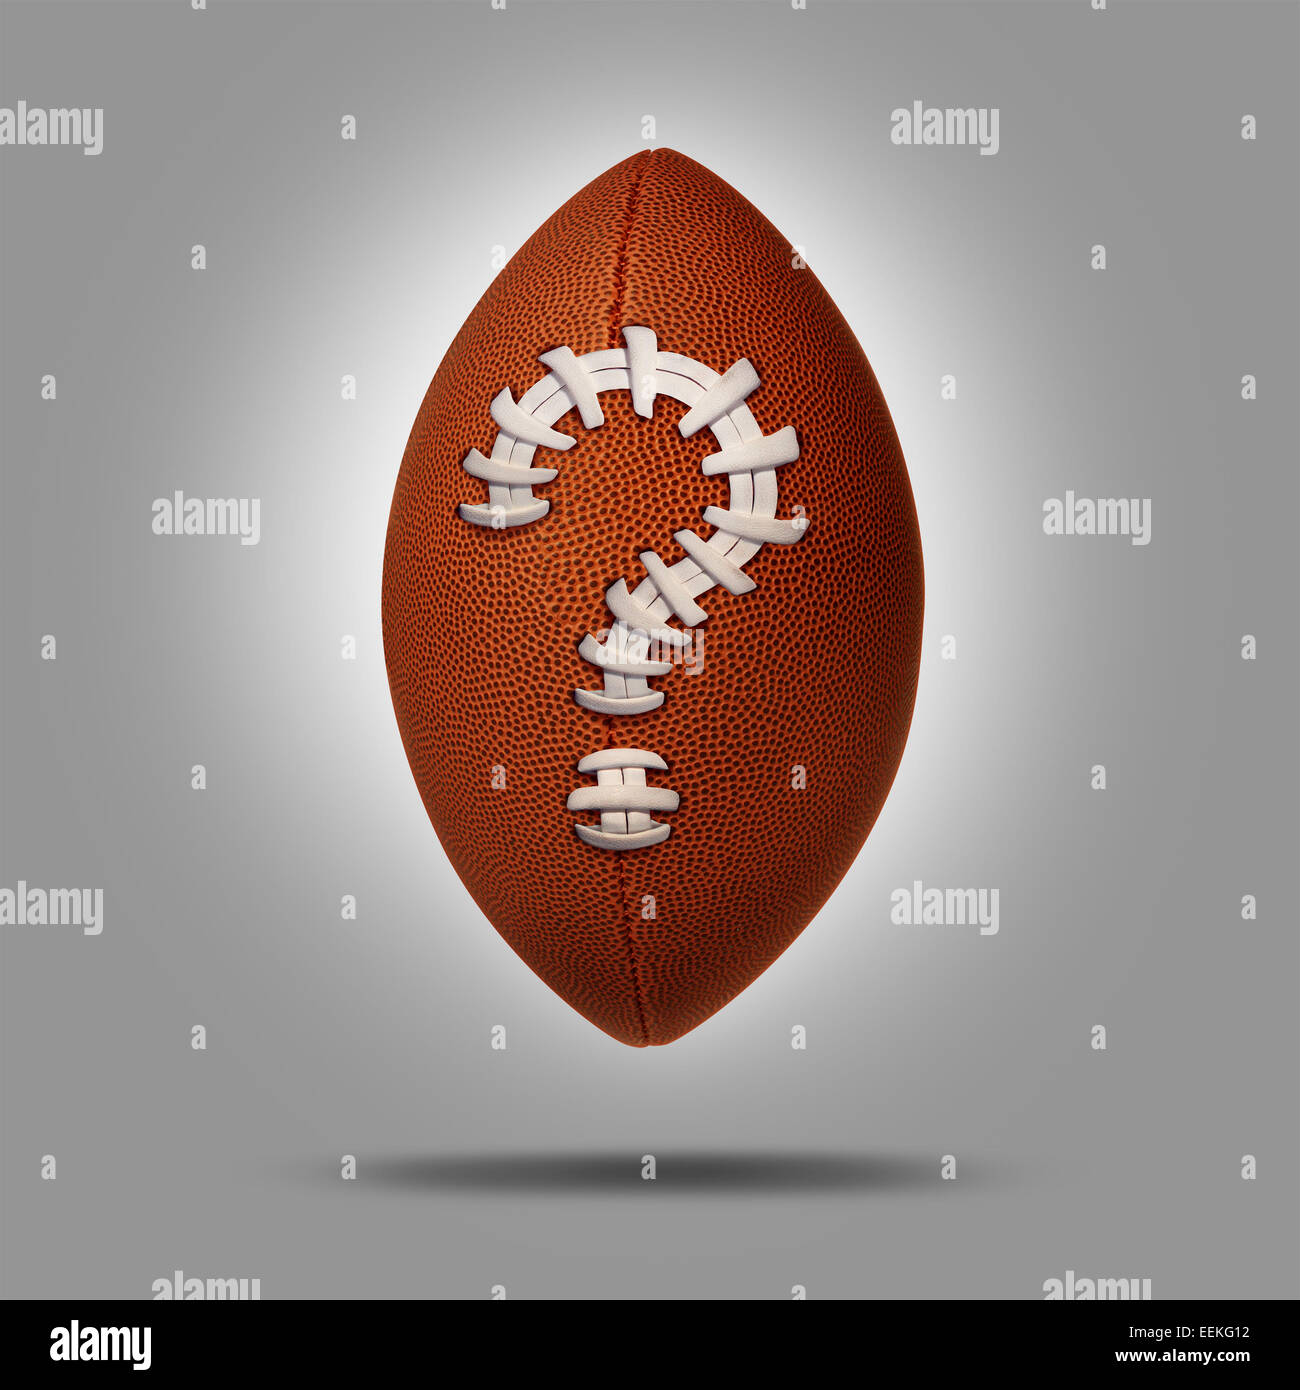 Sports betting concept as an American football with a question mark symbol as a metaphor for sport  match predictions and uncertainty of the final score. Stock Photo